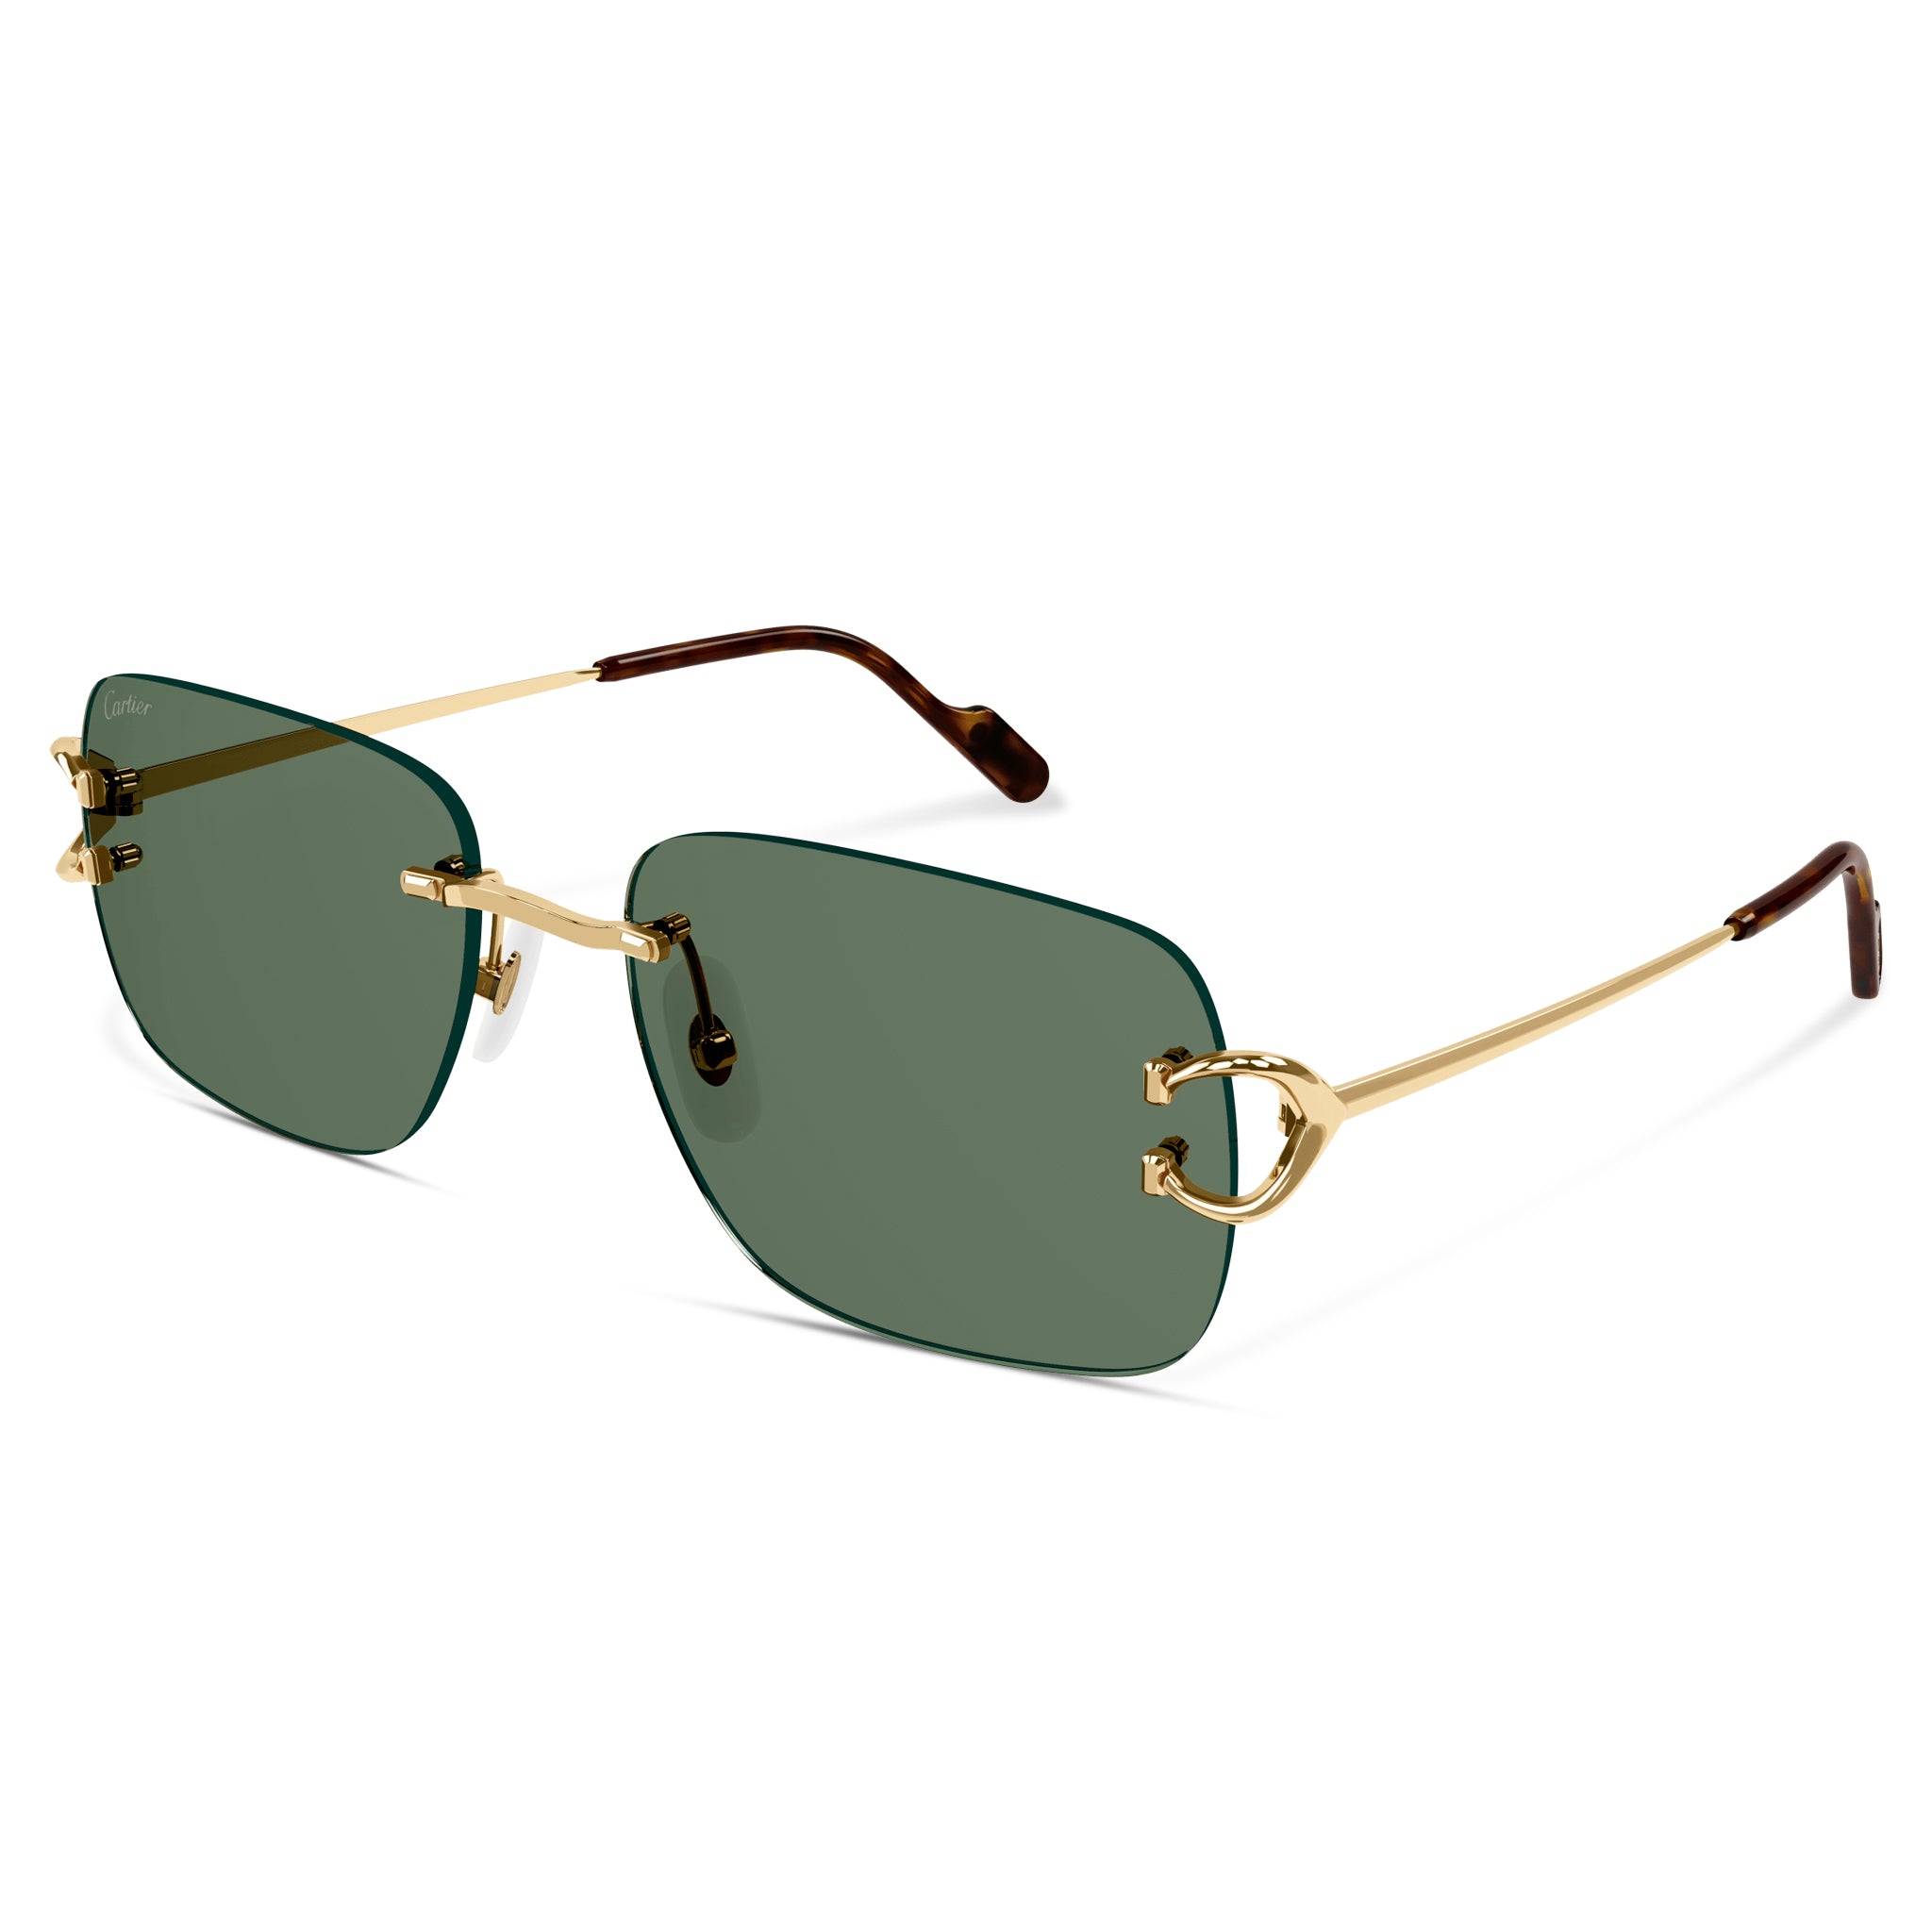 Side view of Cartier Eyewear CT0330S-005 C Decor Gold Green Rimless Sunglasses CT0330S-005